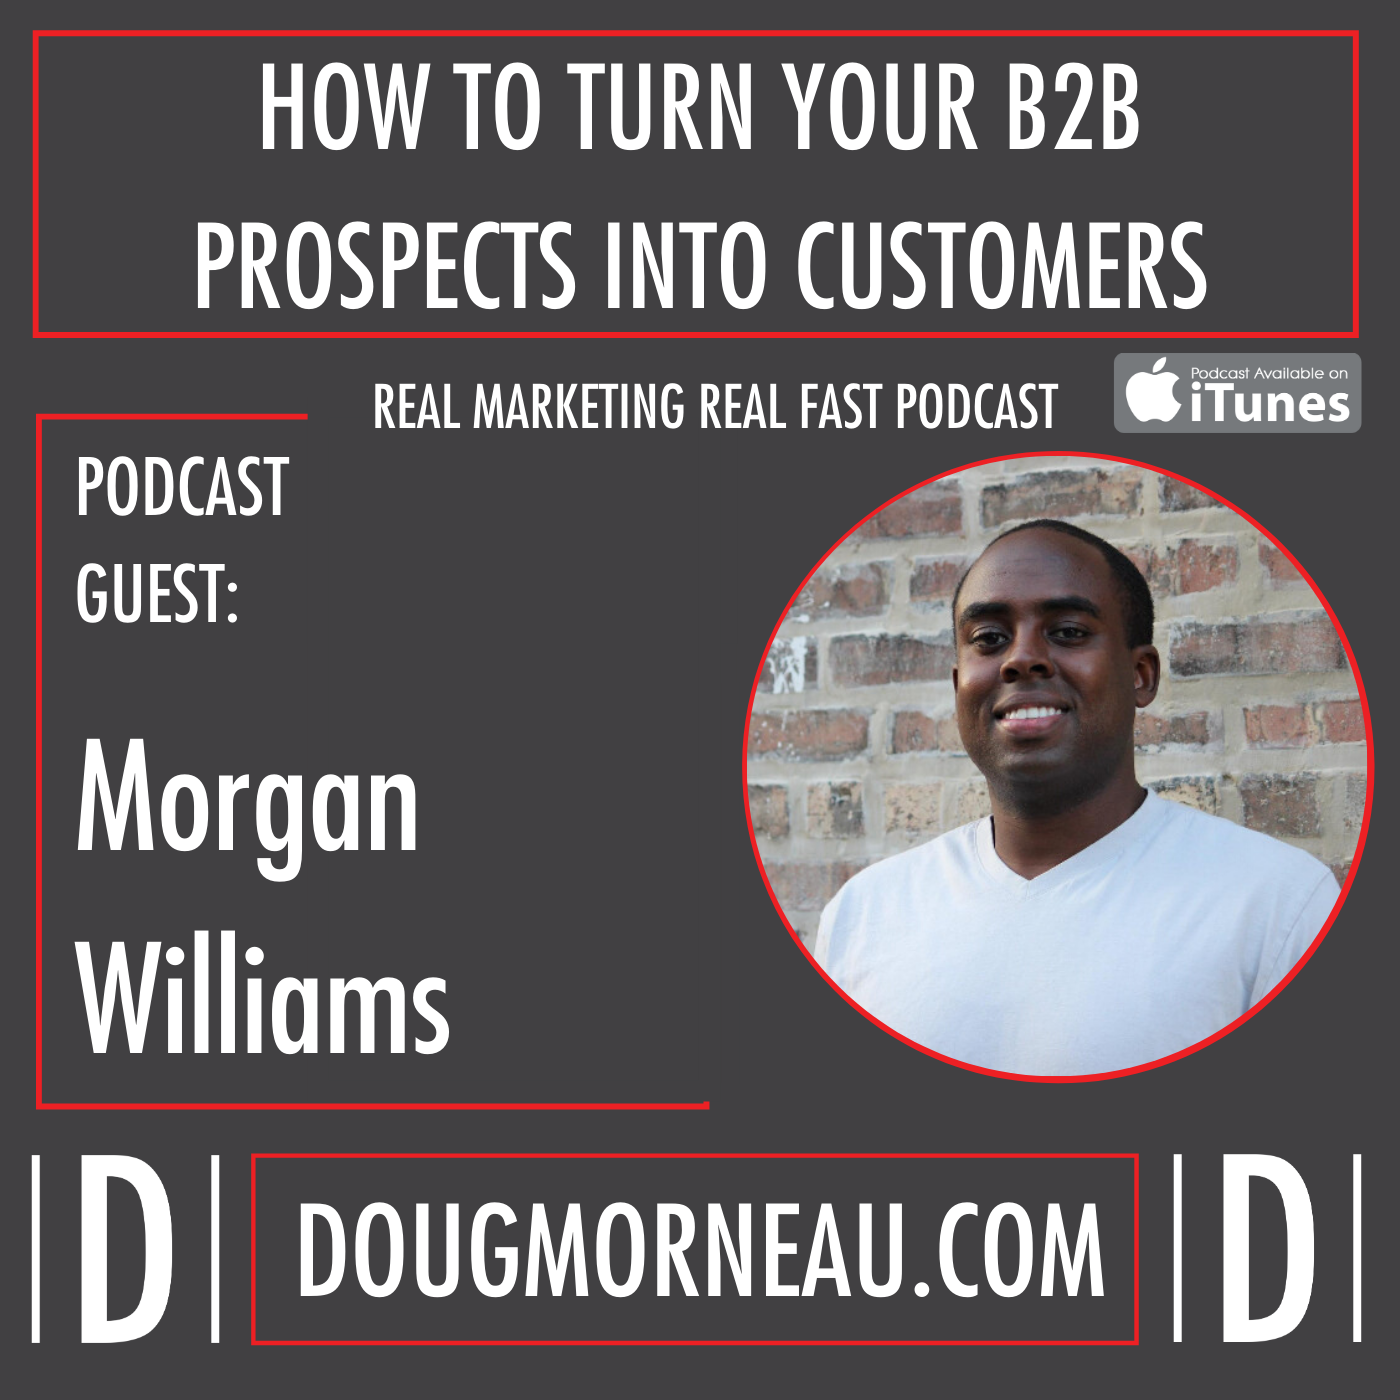 MORGAN WILLIAMS - HOW TO TURN YOUR B2B PROSPECTS INTO CUSTOMERS - DOUG MORNEAU - REAL MARKETING REAL FAST PODCAST